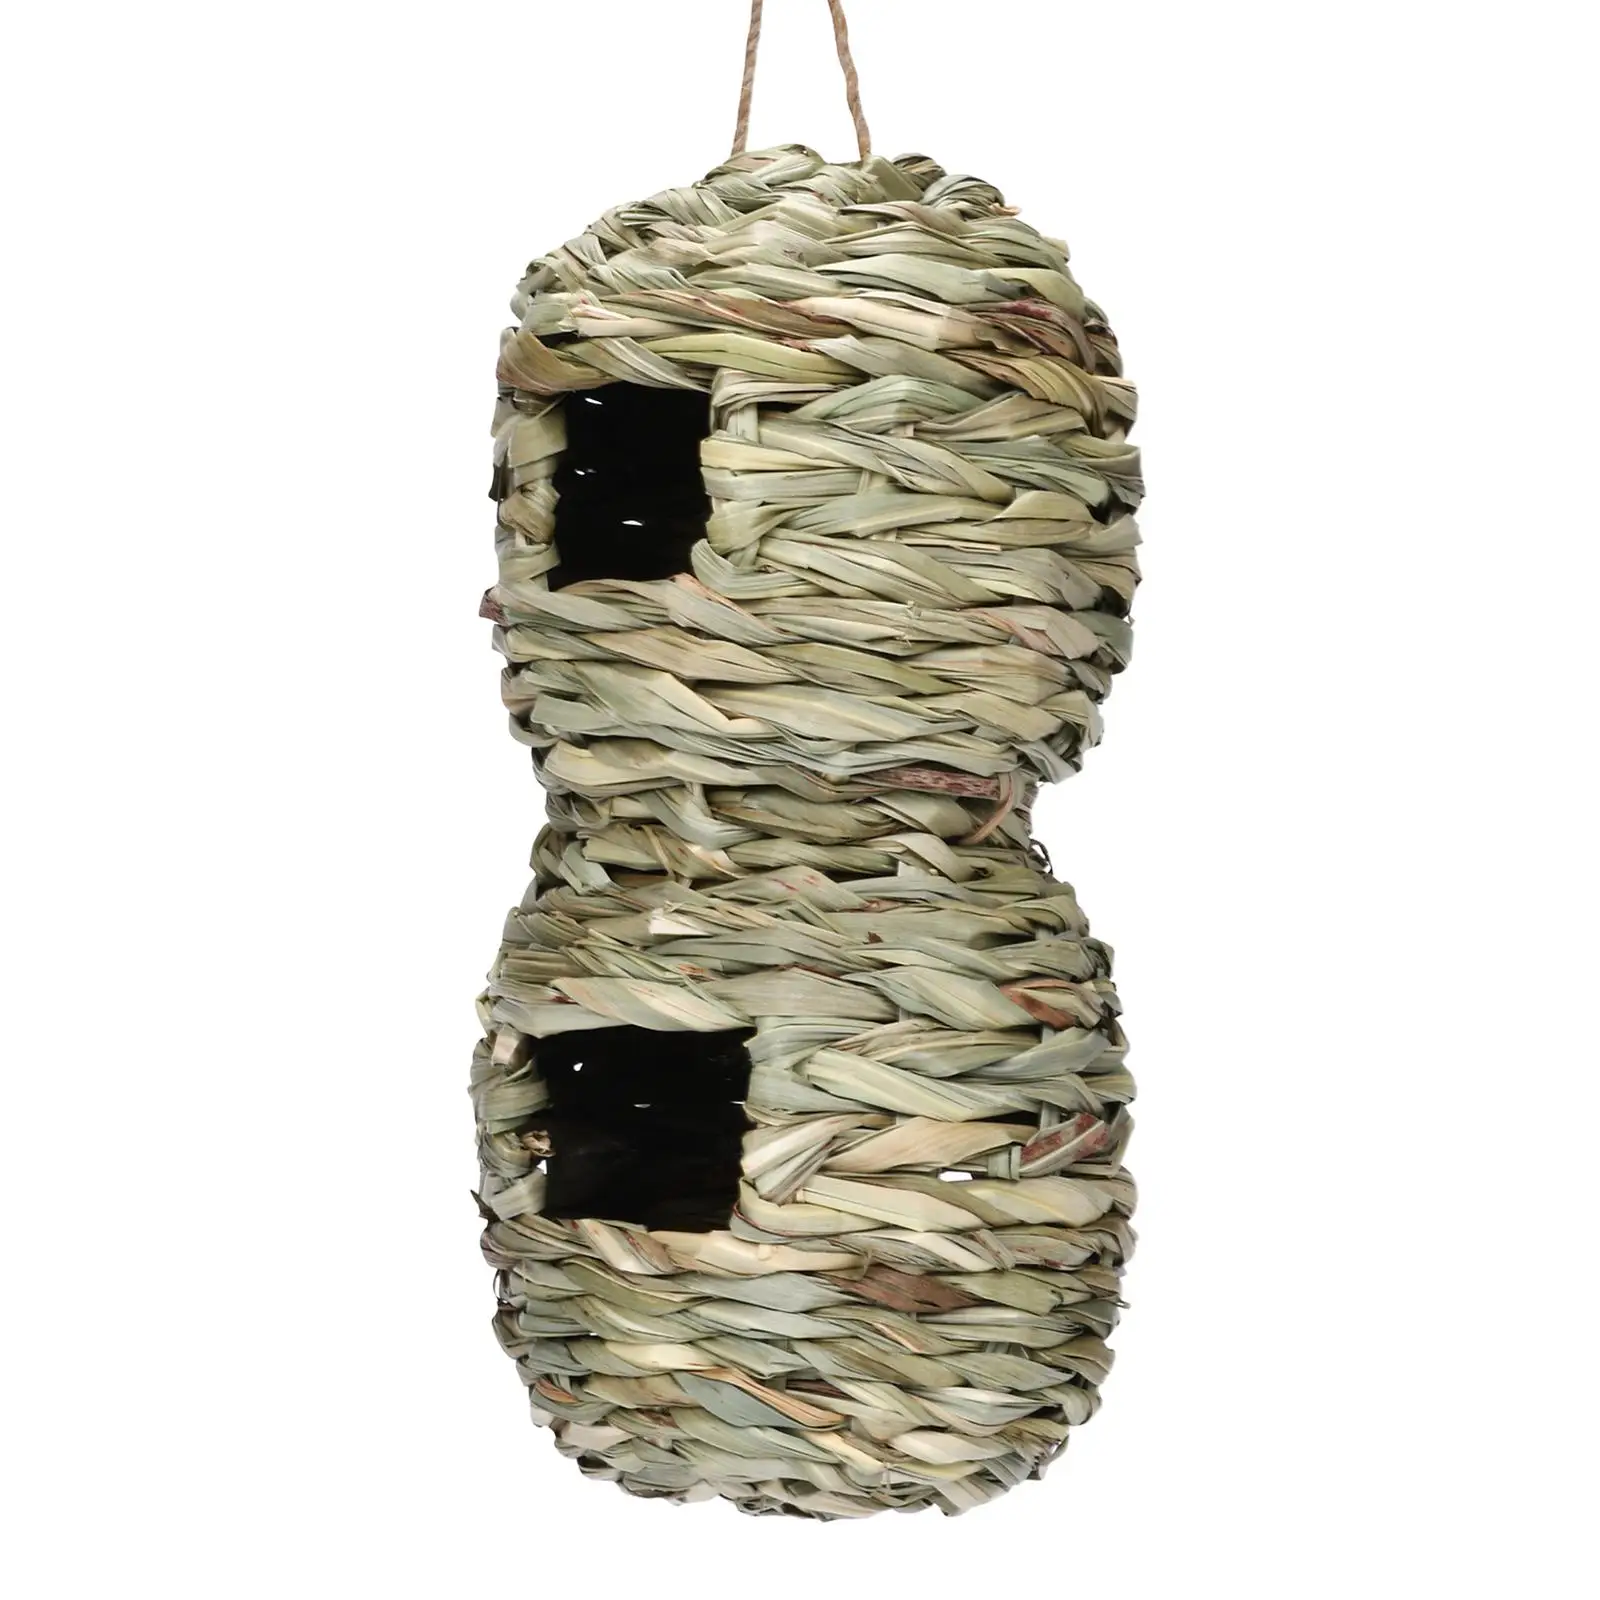 Bird House Straw Hand Woven Shelter Parrot Nest Double Hole Outdoor Hanging Birdhouse for Hummingbird Canary Finch Lawn Garden